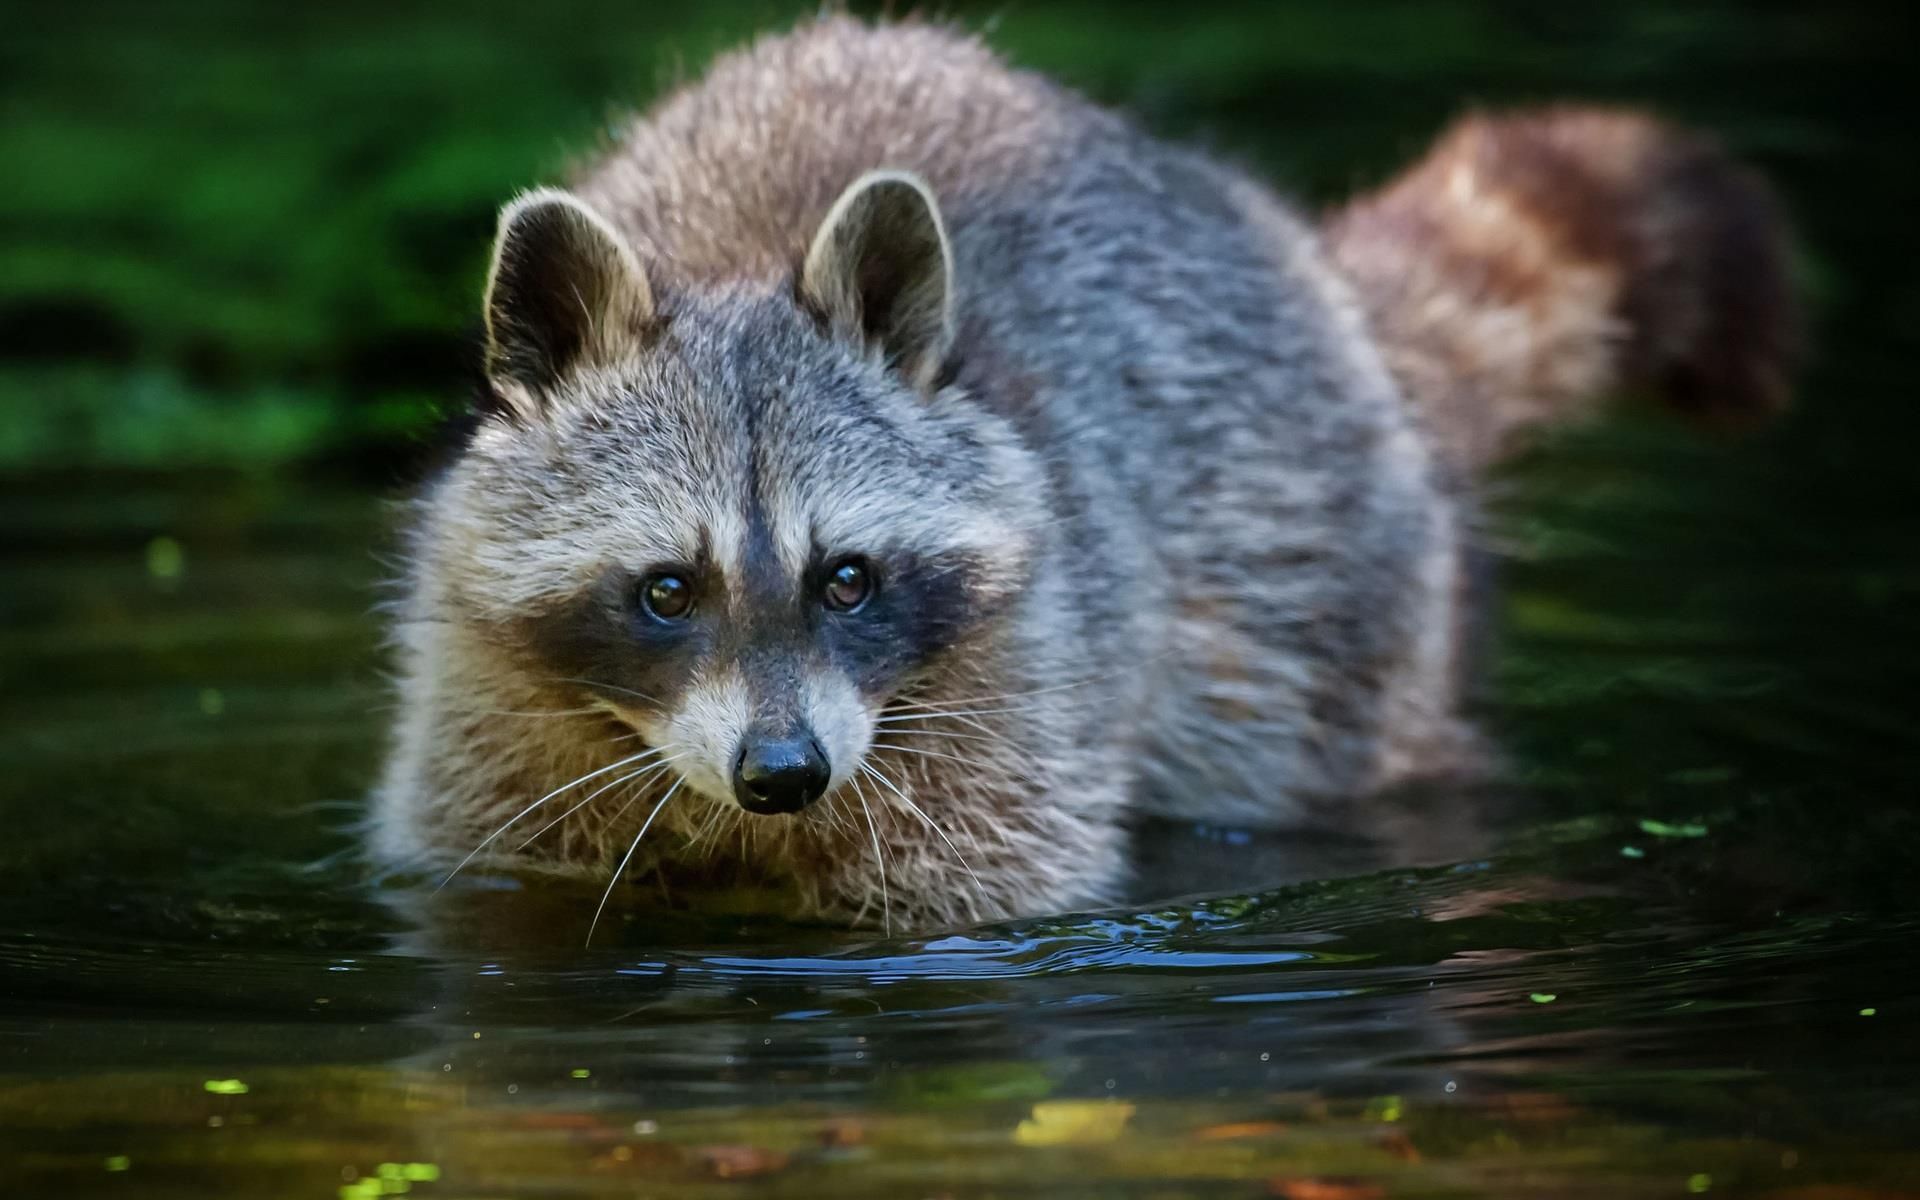 Get Awesome Raccoons HD Image In Each New Chrome Tab A